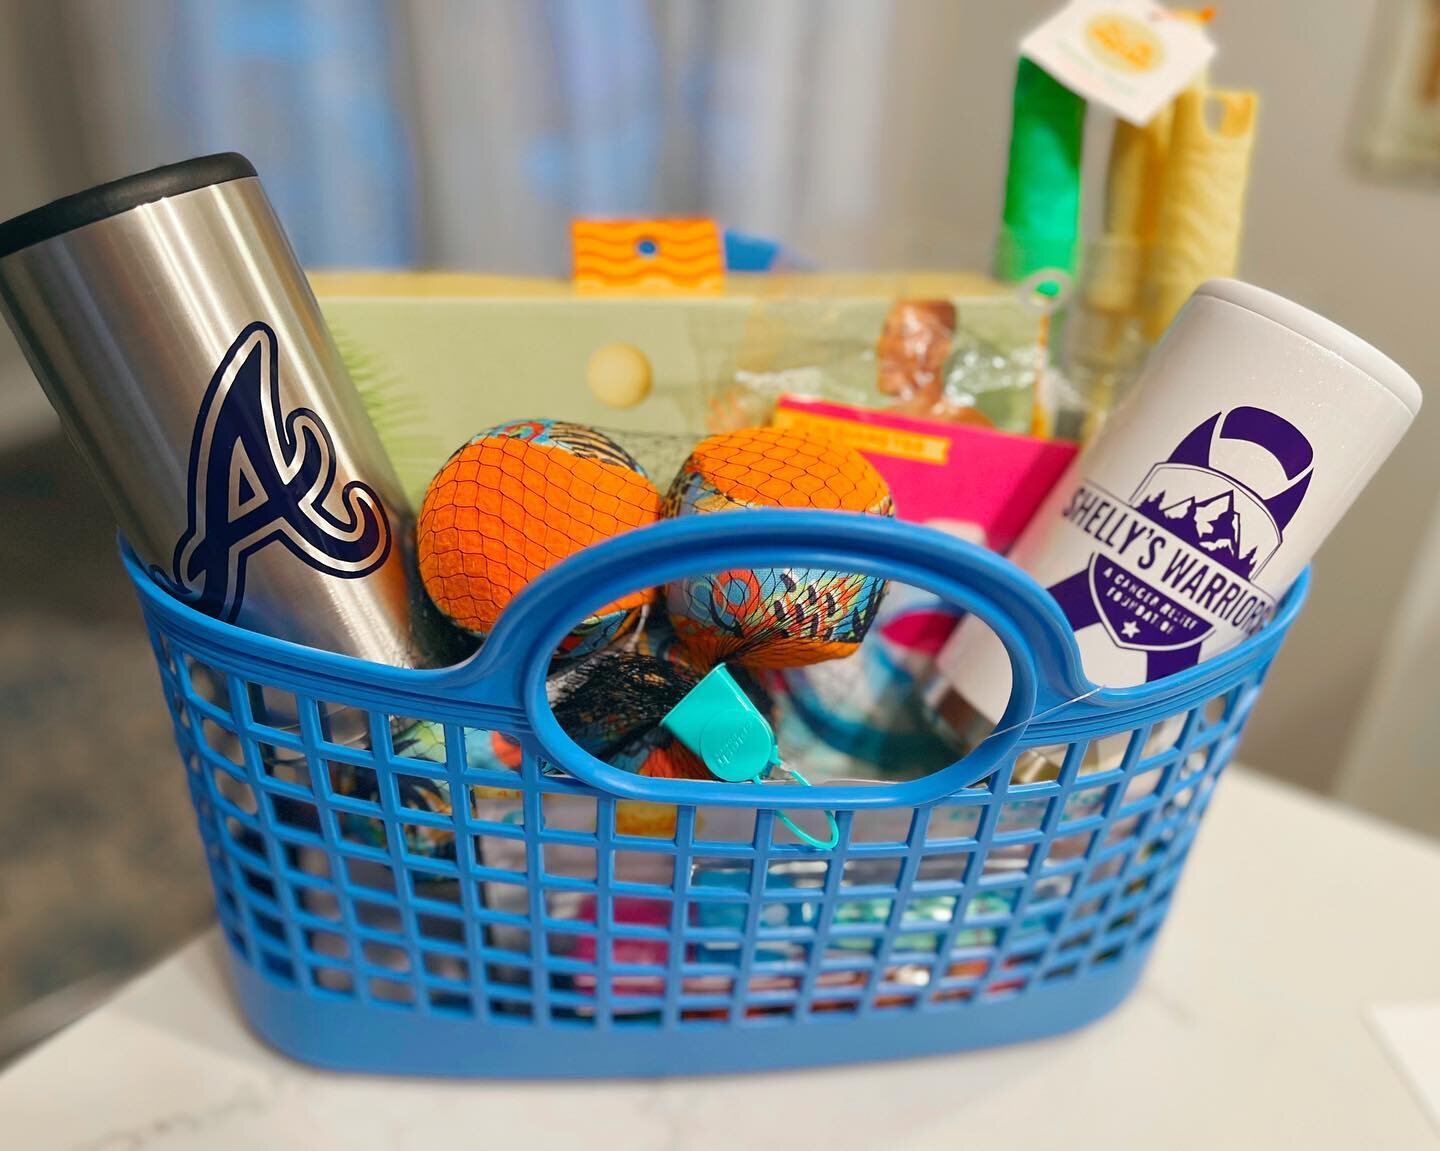 Gift Basket Goelz 🌊 
Anyone else love a gift basket?! Add a personal touch to any gift by adding a Gift Goelz original!

#giftbasket #personalizedgifts #customkoozies #skinnycancooler #cricutmade #gifting